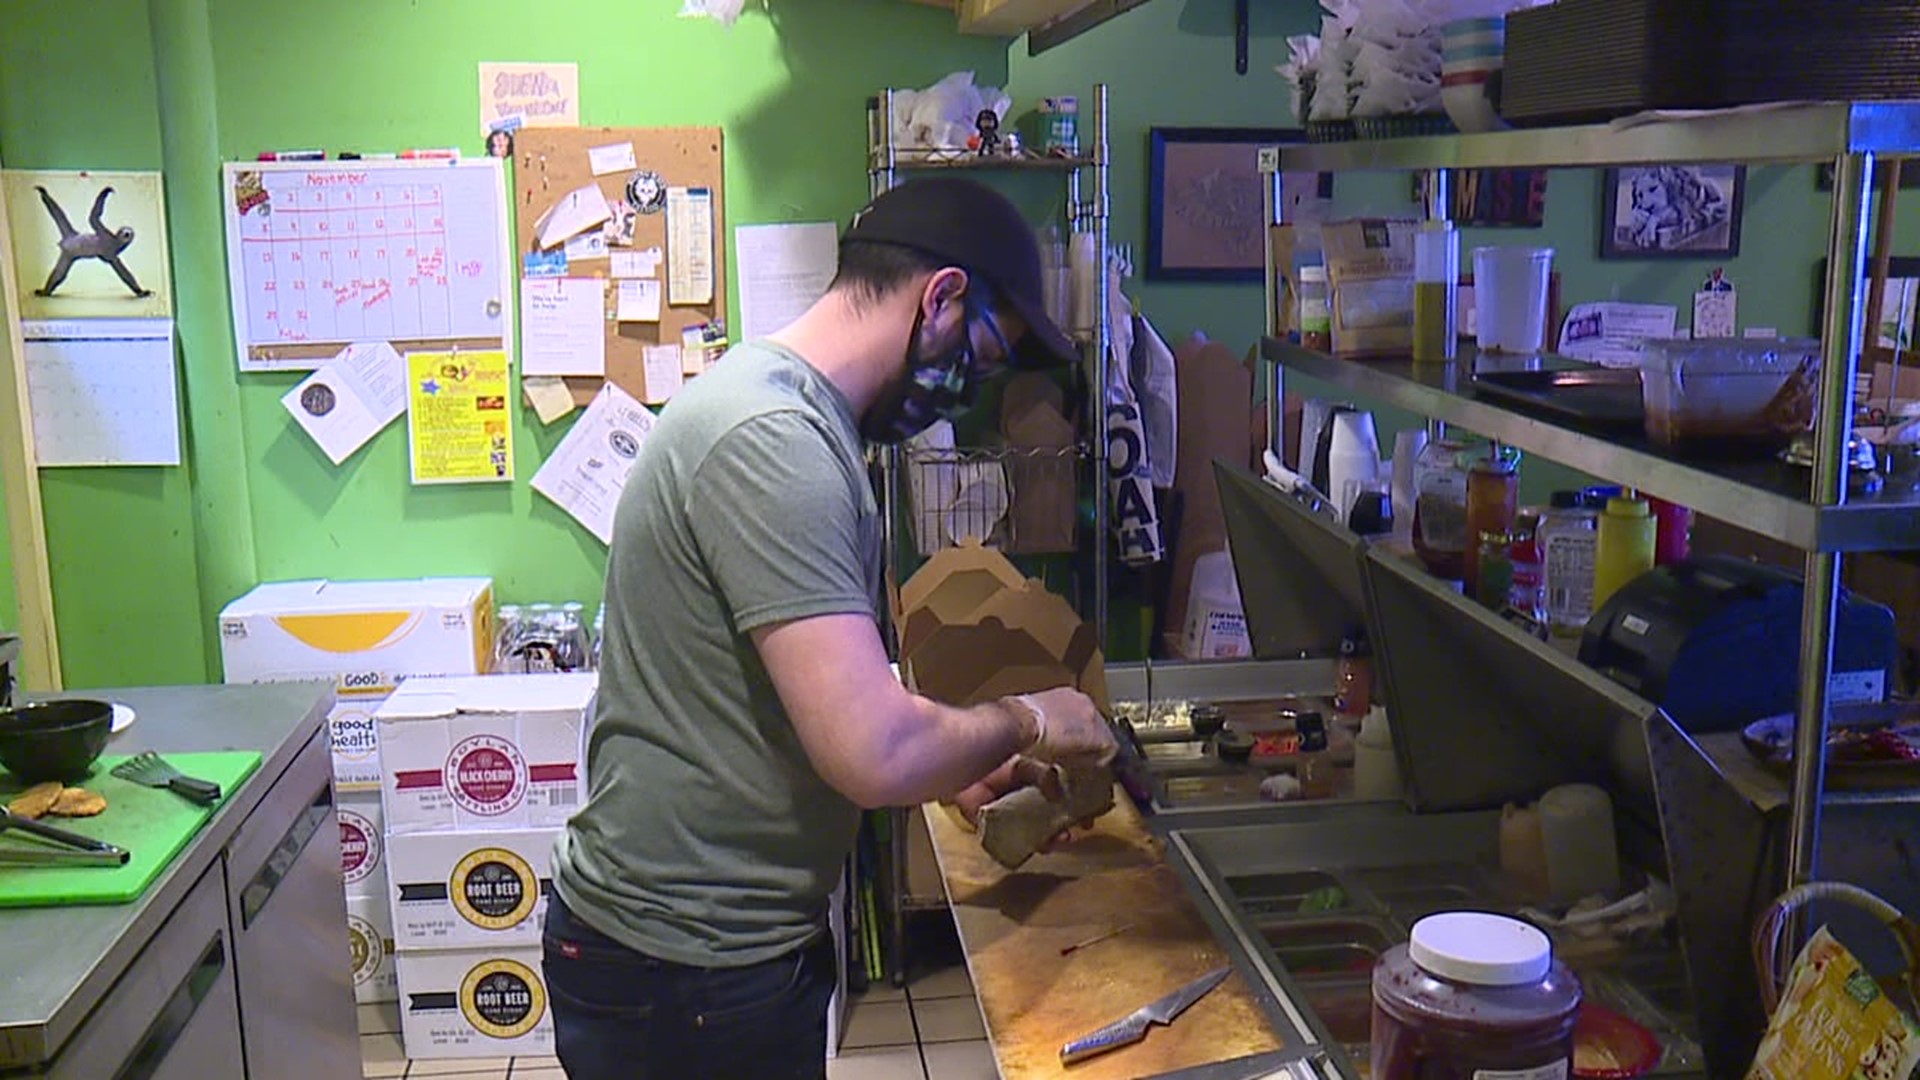 Restaurants in downtown Scranton hope the move drums up takeout business.